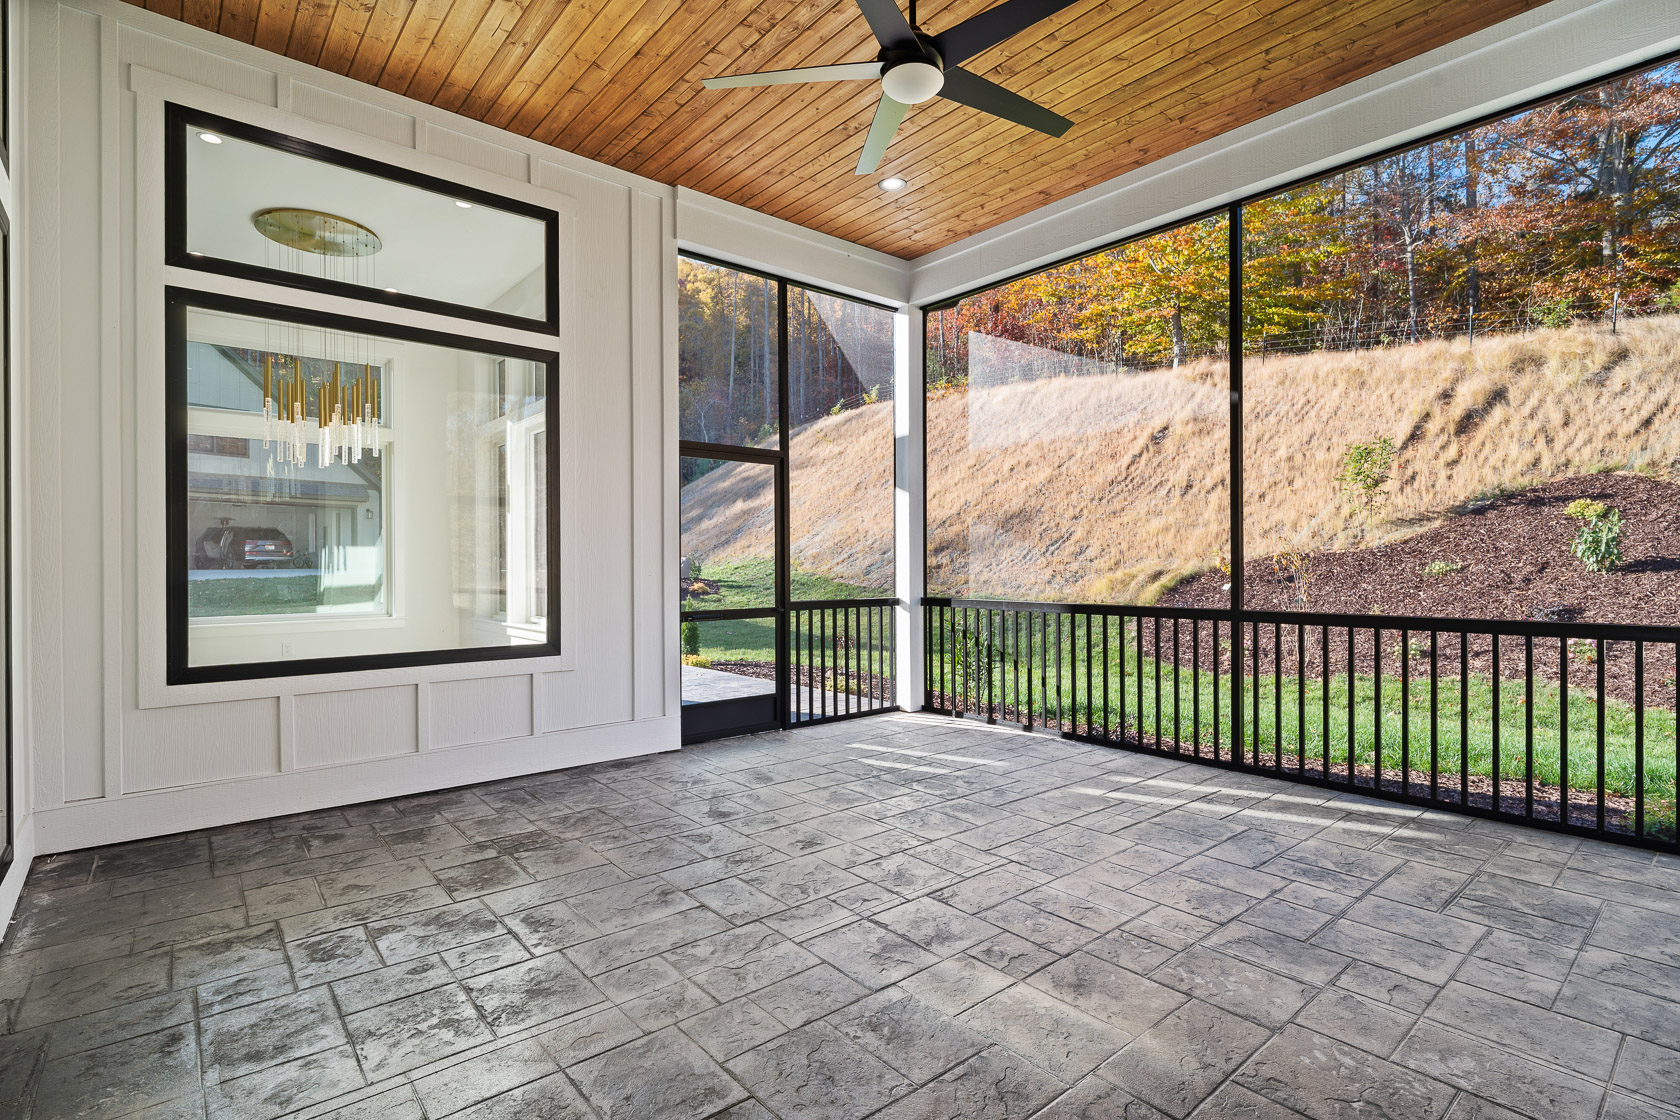 Blending Centuries-Old Materials with Contemporary Design: A Timeless Fusion. Big Hills Construction Custom Home Builder in Asheville, North Carolina